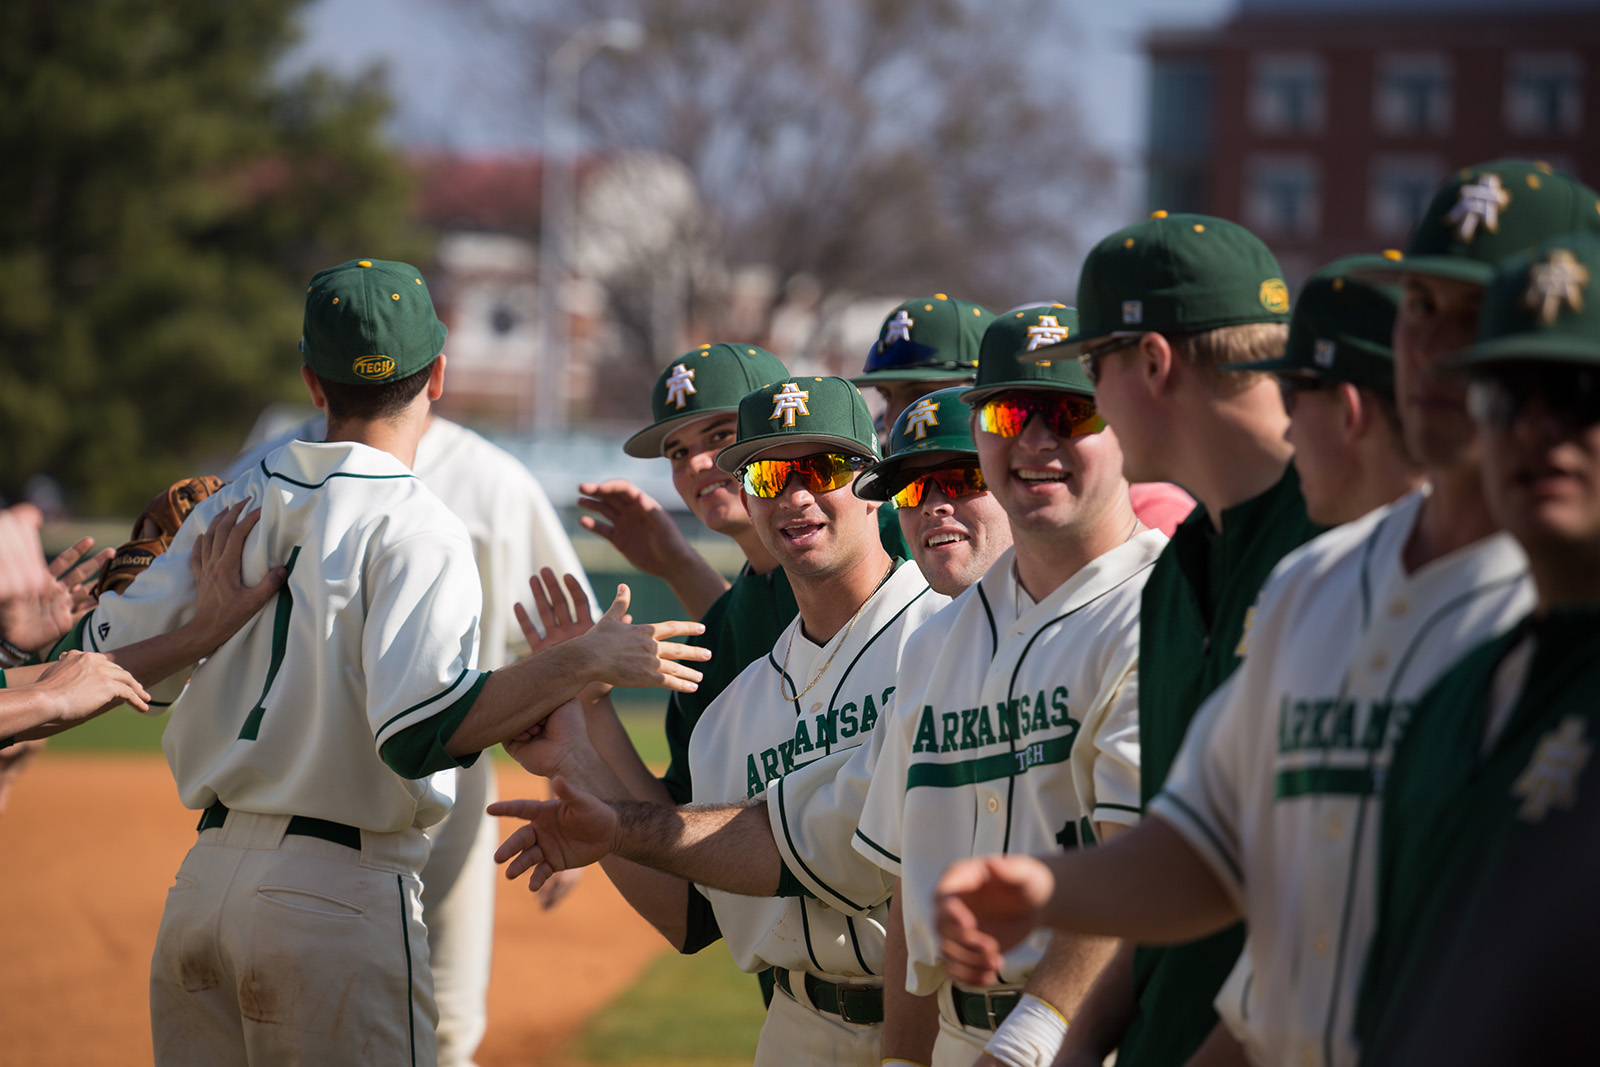 The baseball team congratulates each other after a great game